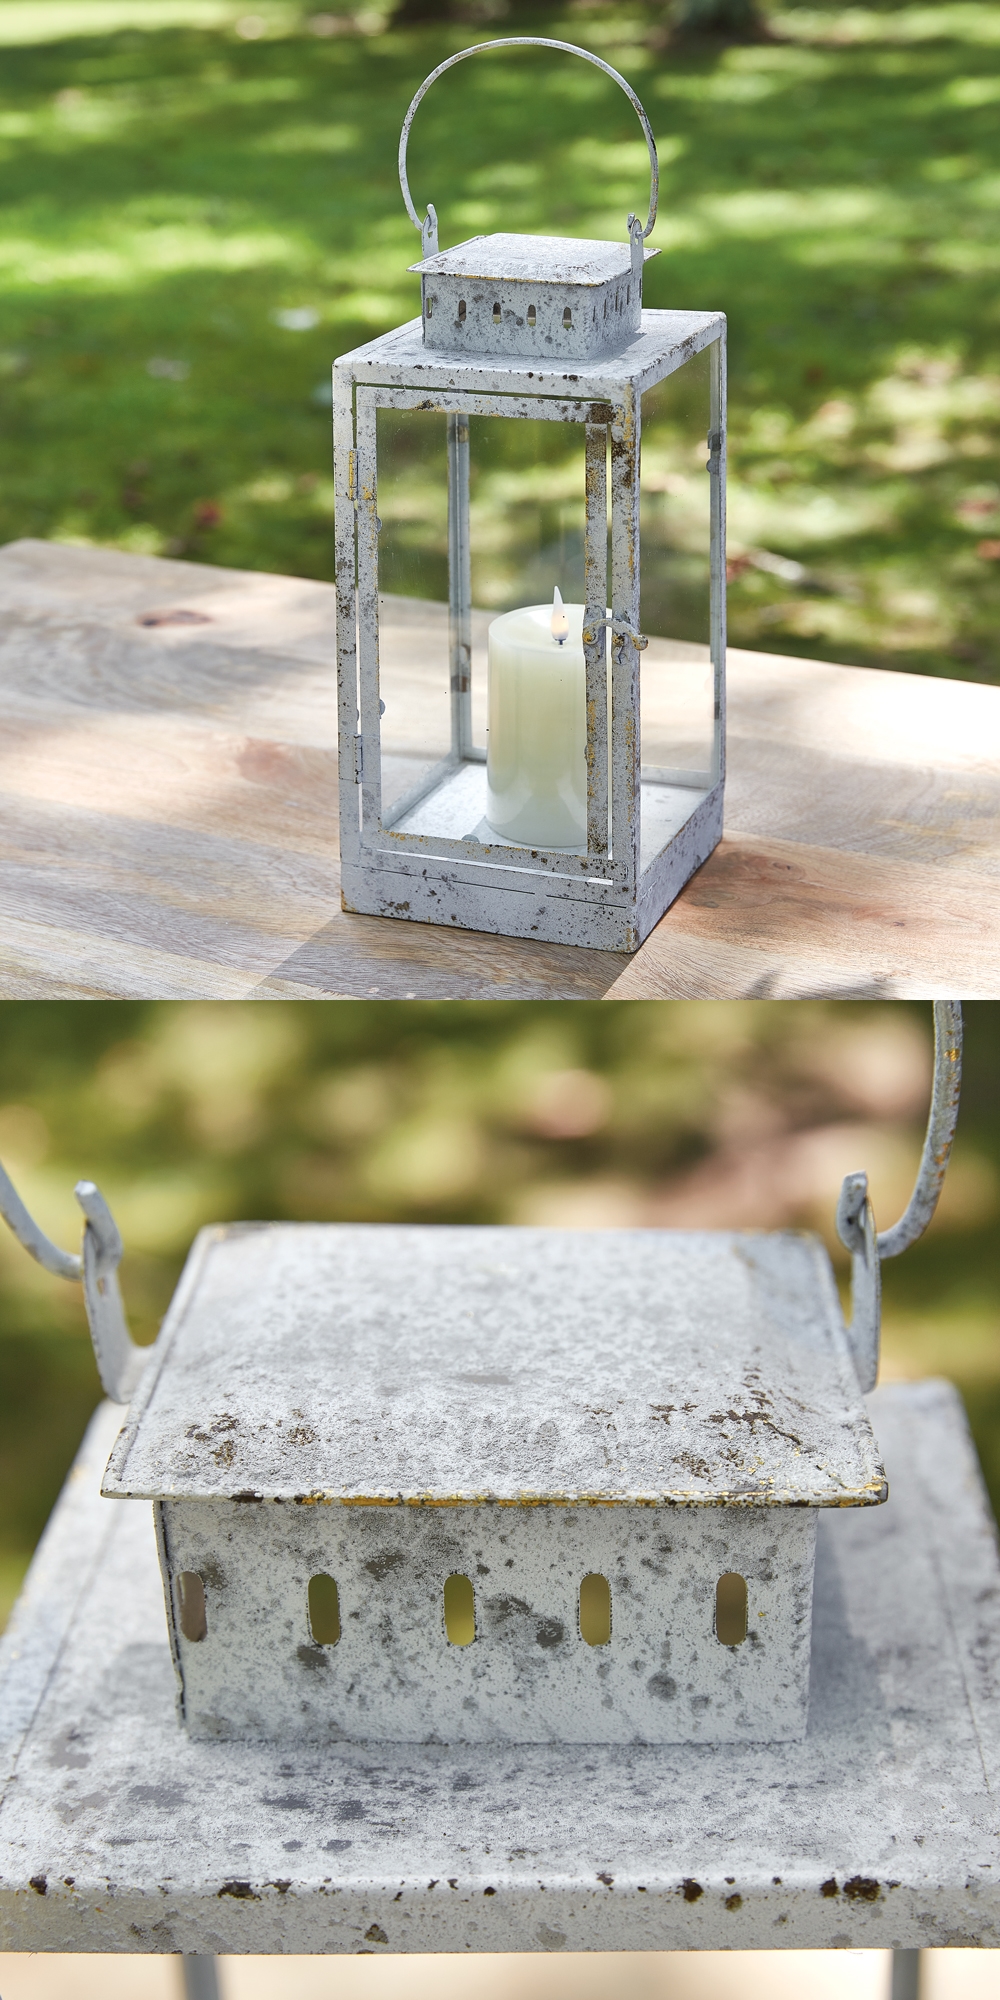 CTW Home Collection Rustic Cottage Metal and Glass Milk House Lantern